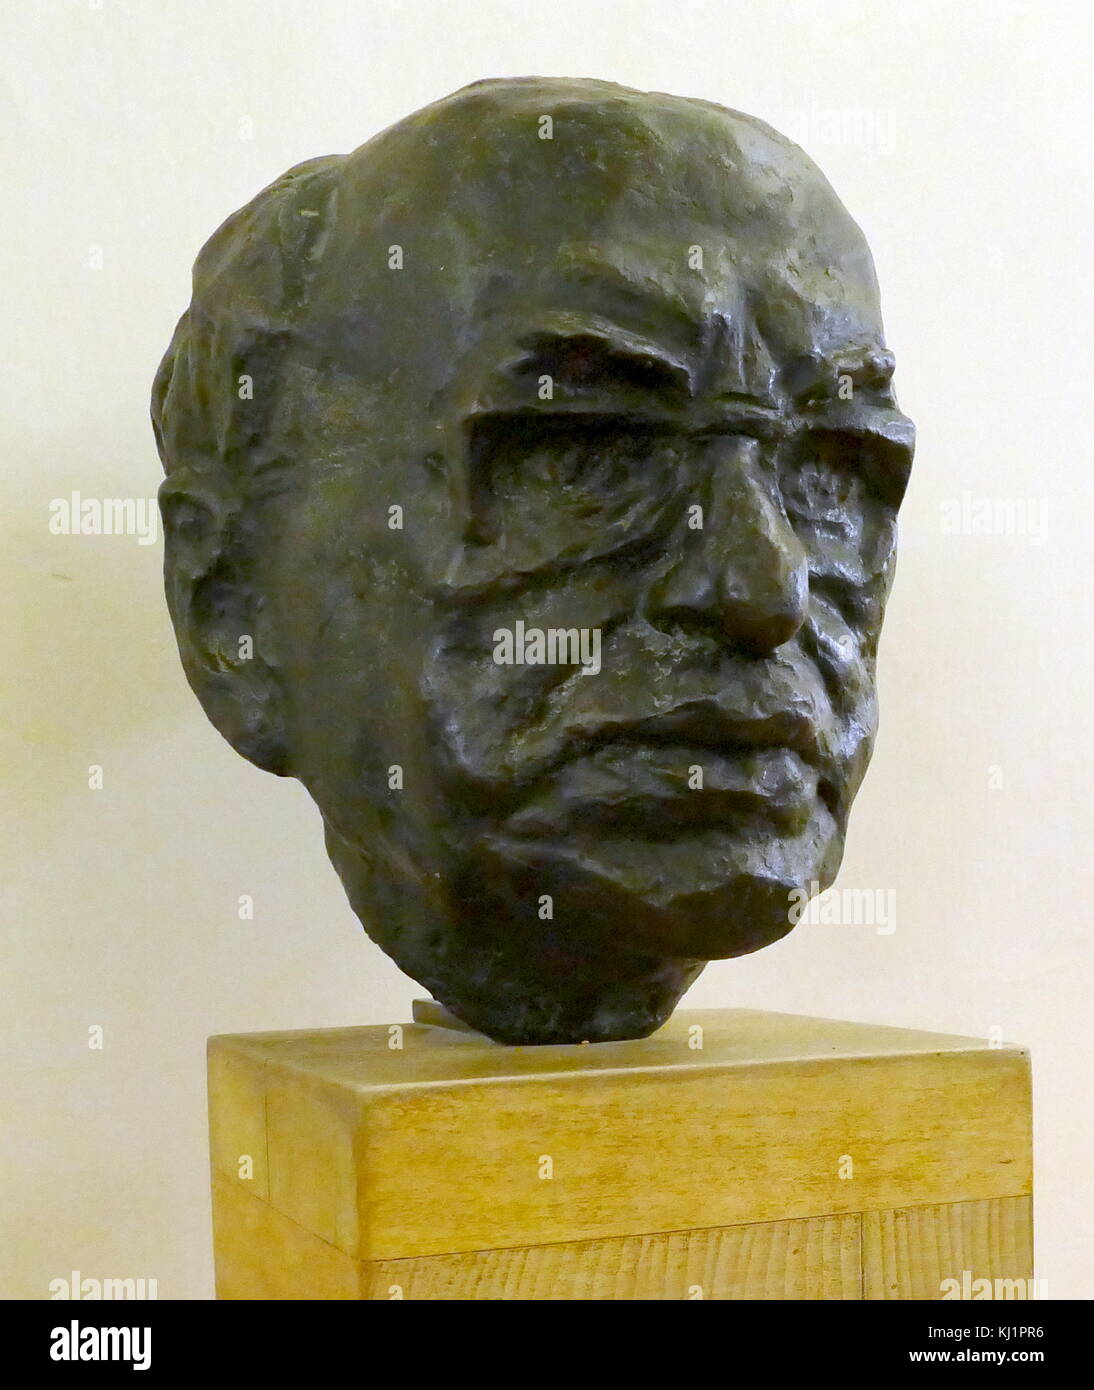 1963 Bust depicting Zalman Shazar; Israeli politician, author and poet. Shazar served as the third President of Israel from 1963 to 1973 Stock Photo